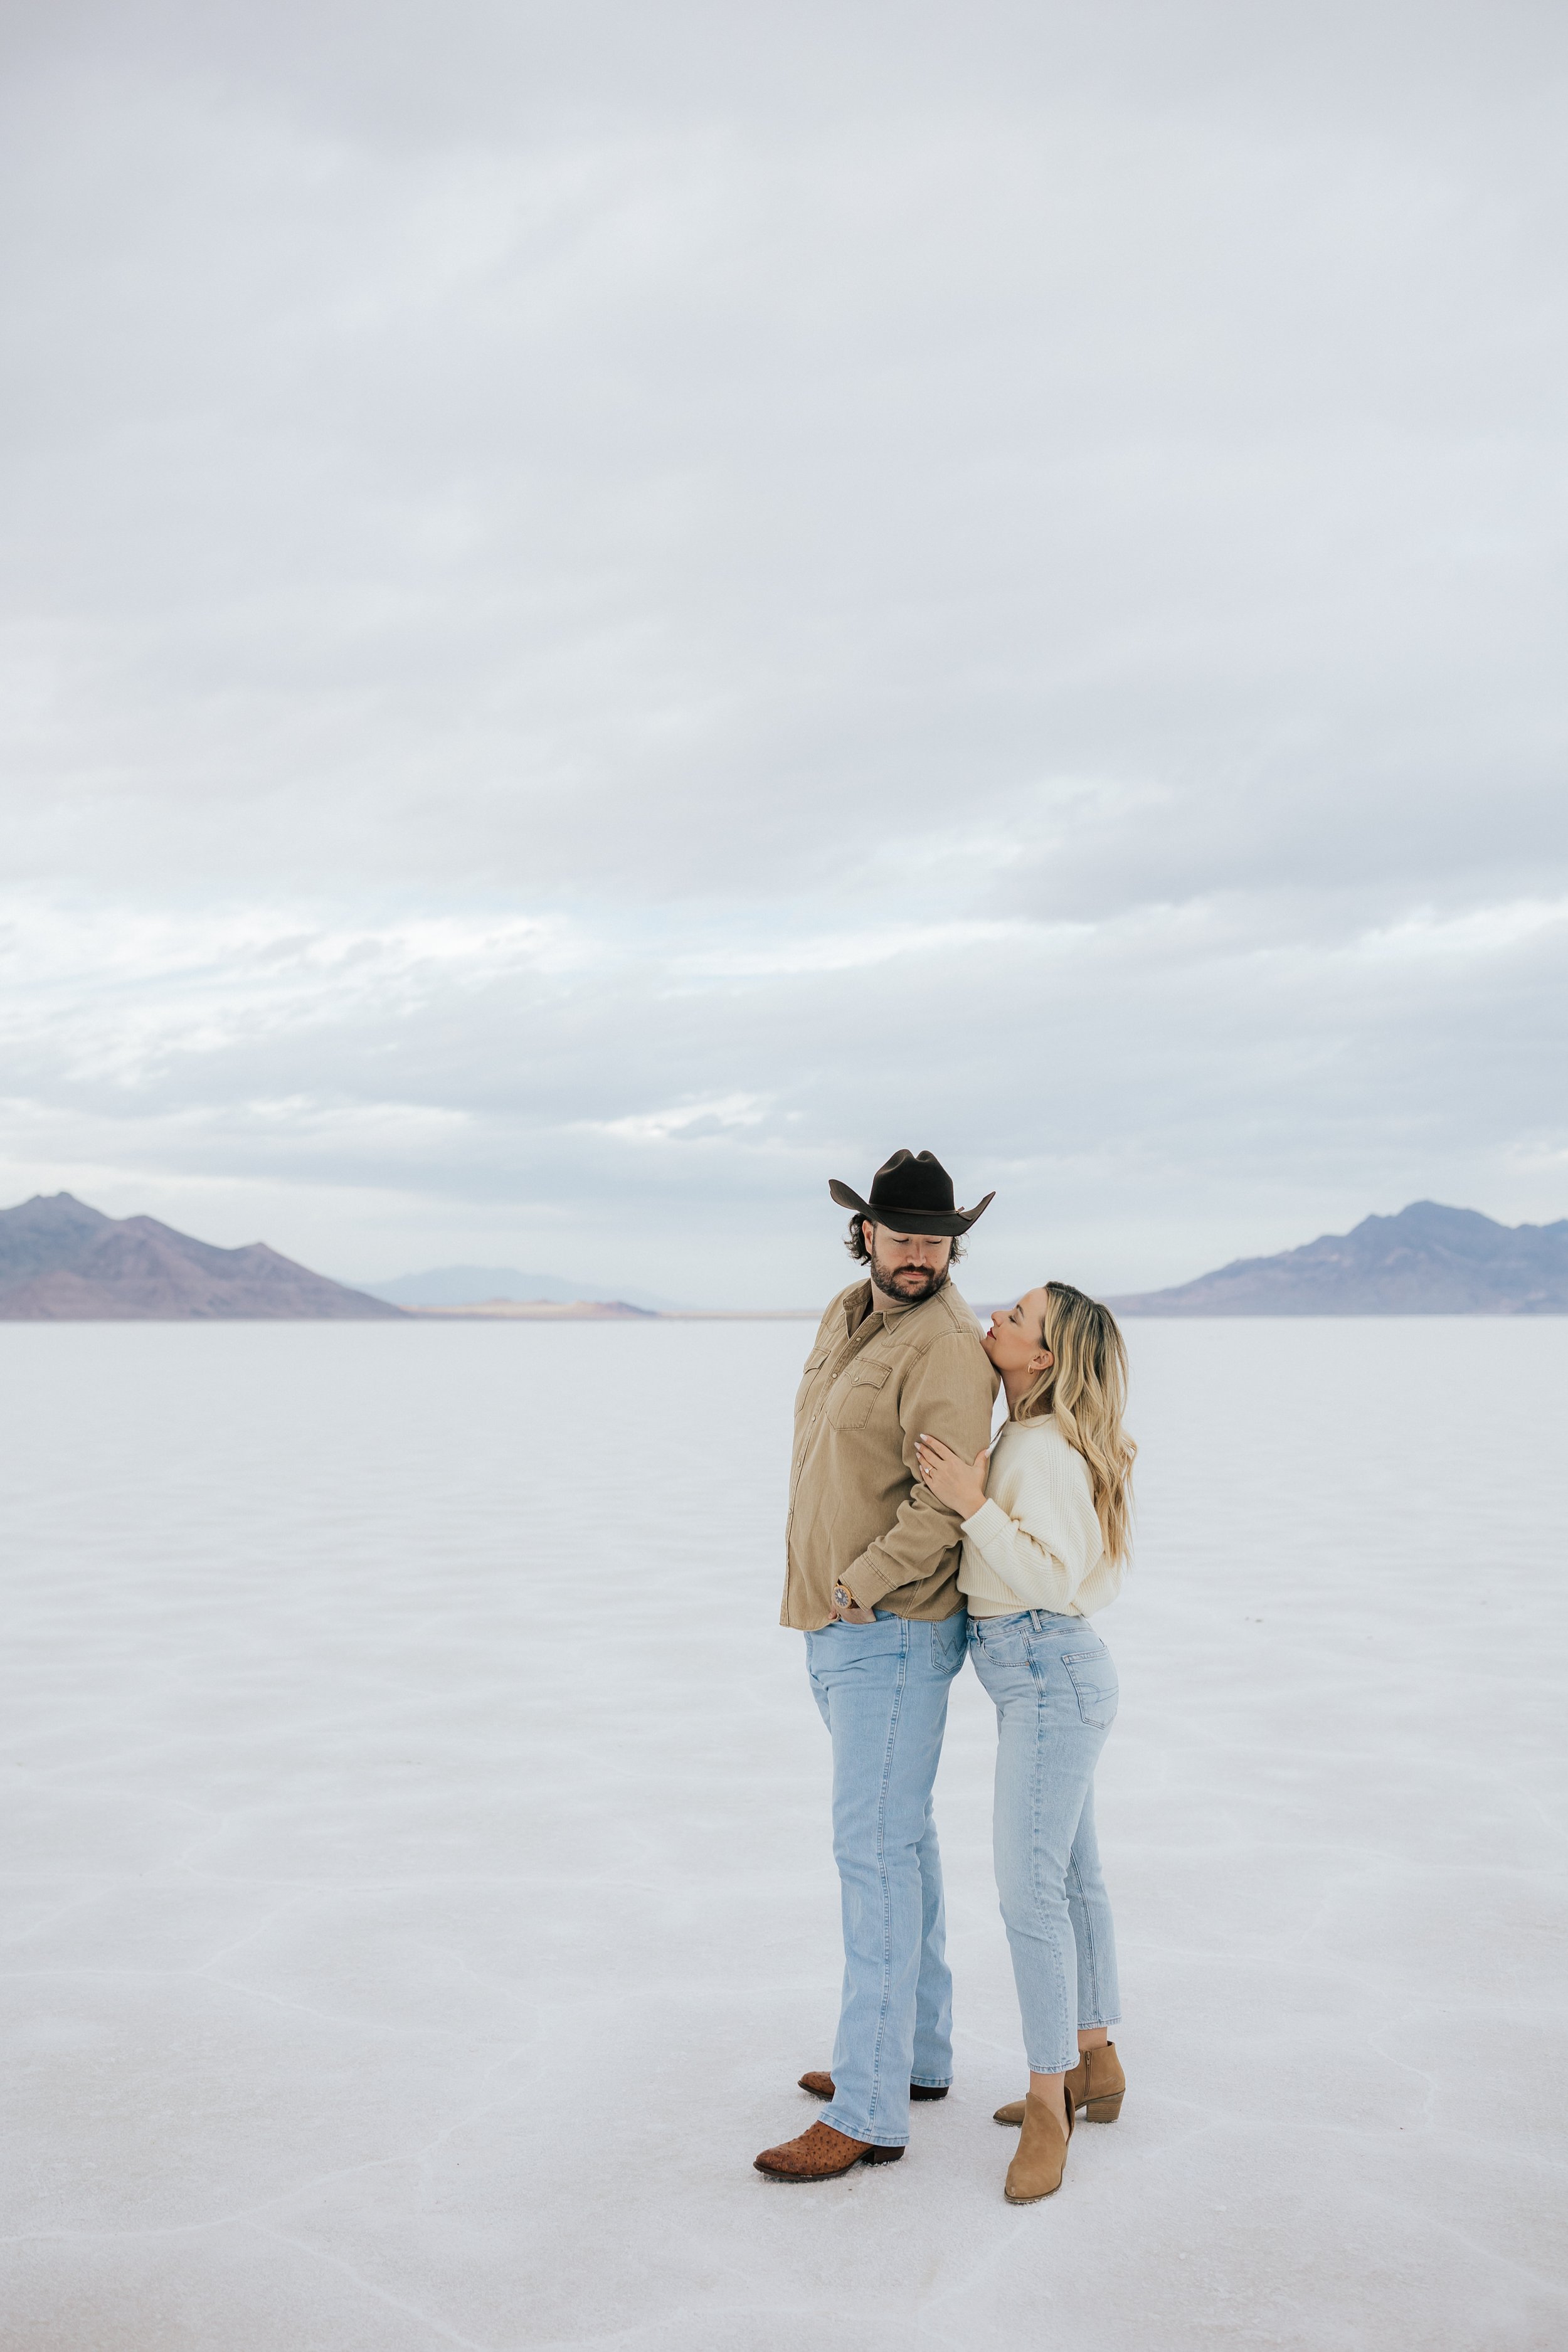  An engaged couple looks at each other as they pose for a photo at the Bonneville Salt Flats near Wendover, Nevada and Salt Lake City, Utah. The Salt Flats are white and the sky is overcast. The mountains show behind. Engagement session at the Utah S